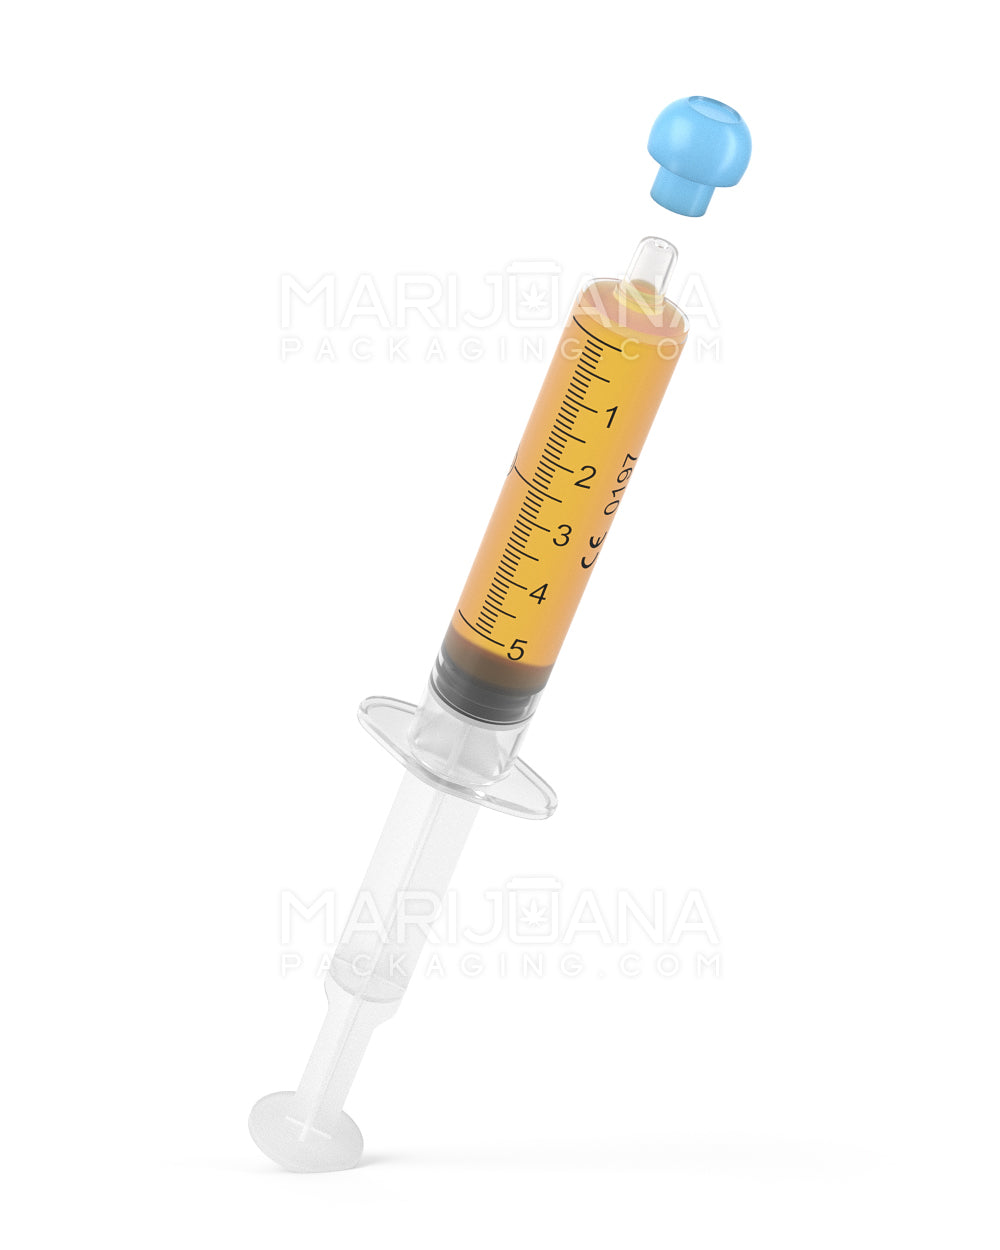 Plastic Oral Concentrate Syringes | 5mL - 1mL Increments | Sample - 6